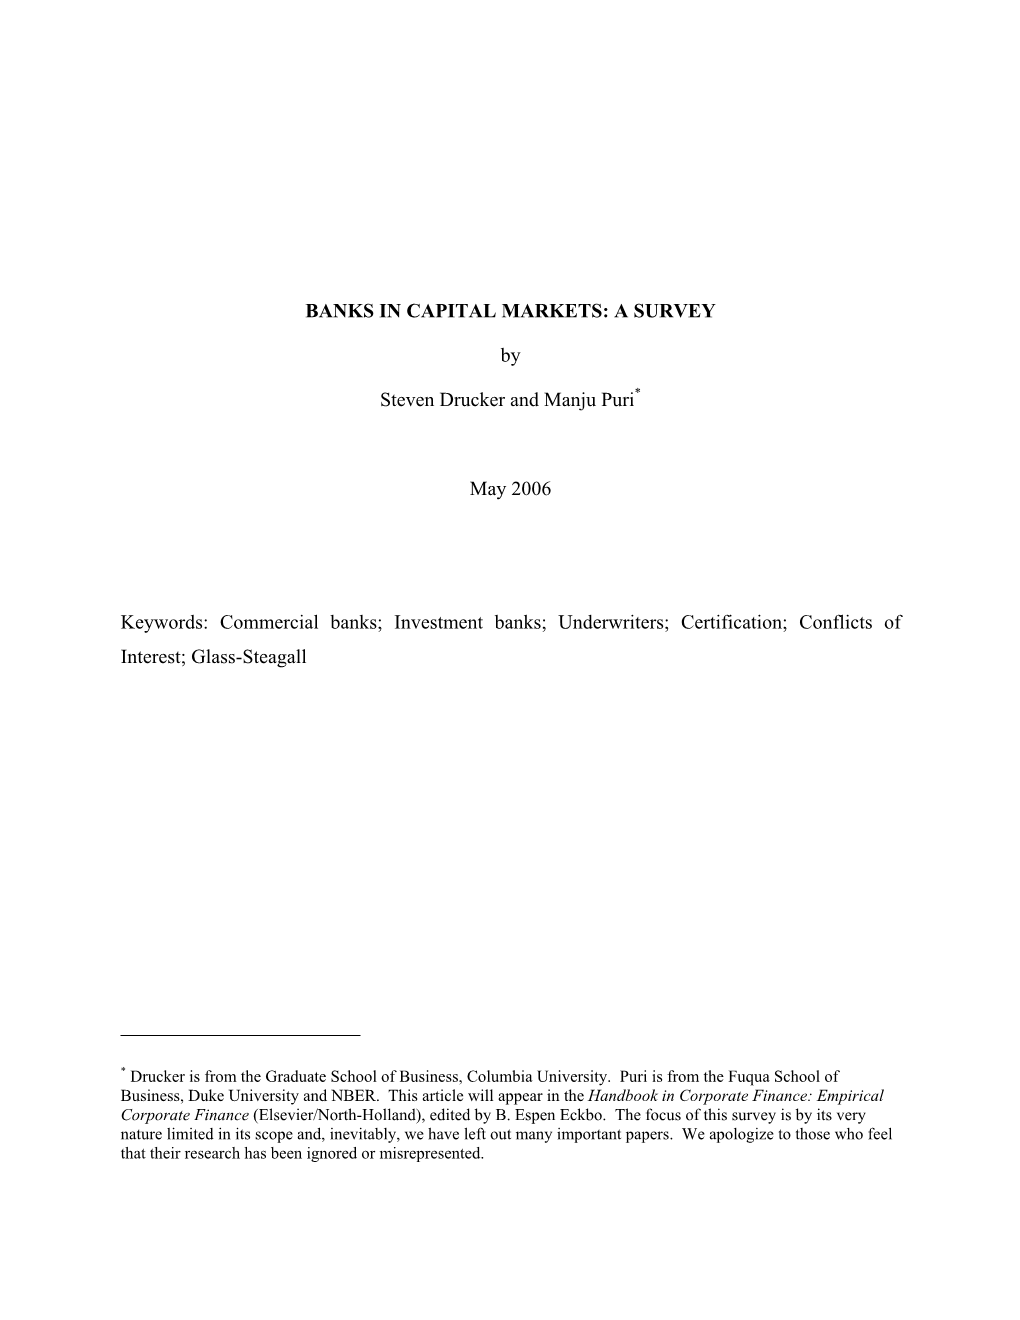 BANKS in CAPITAL MARKETS: a SURVEY by Steven Drucker and Manju Puri May 2006 Keywords: Commercial Banks; Investment Banks; Under